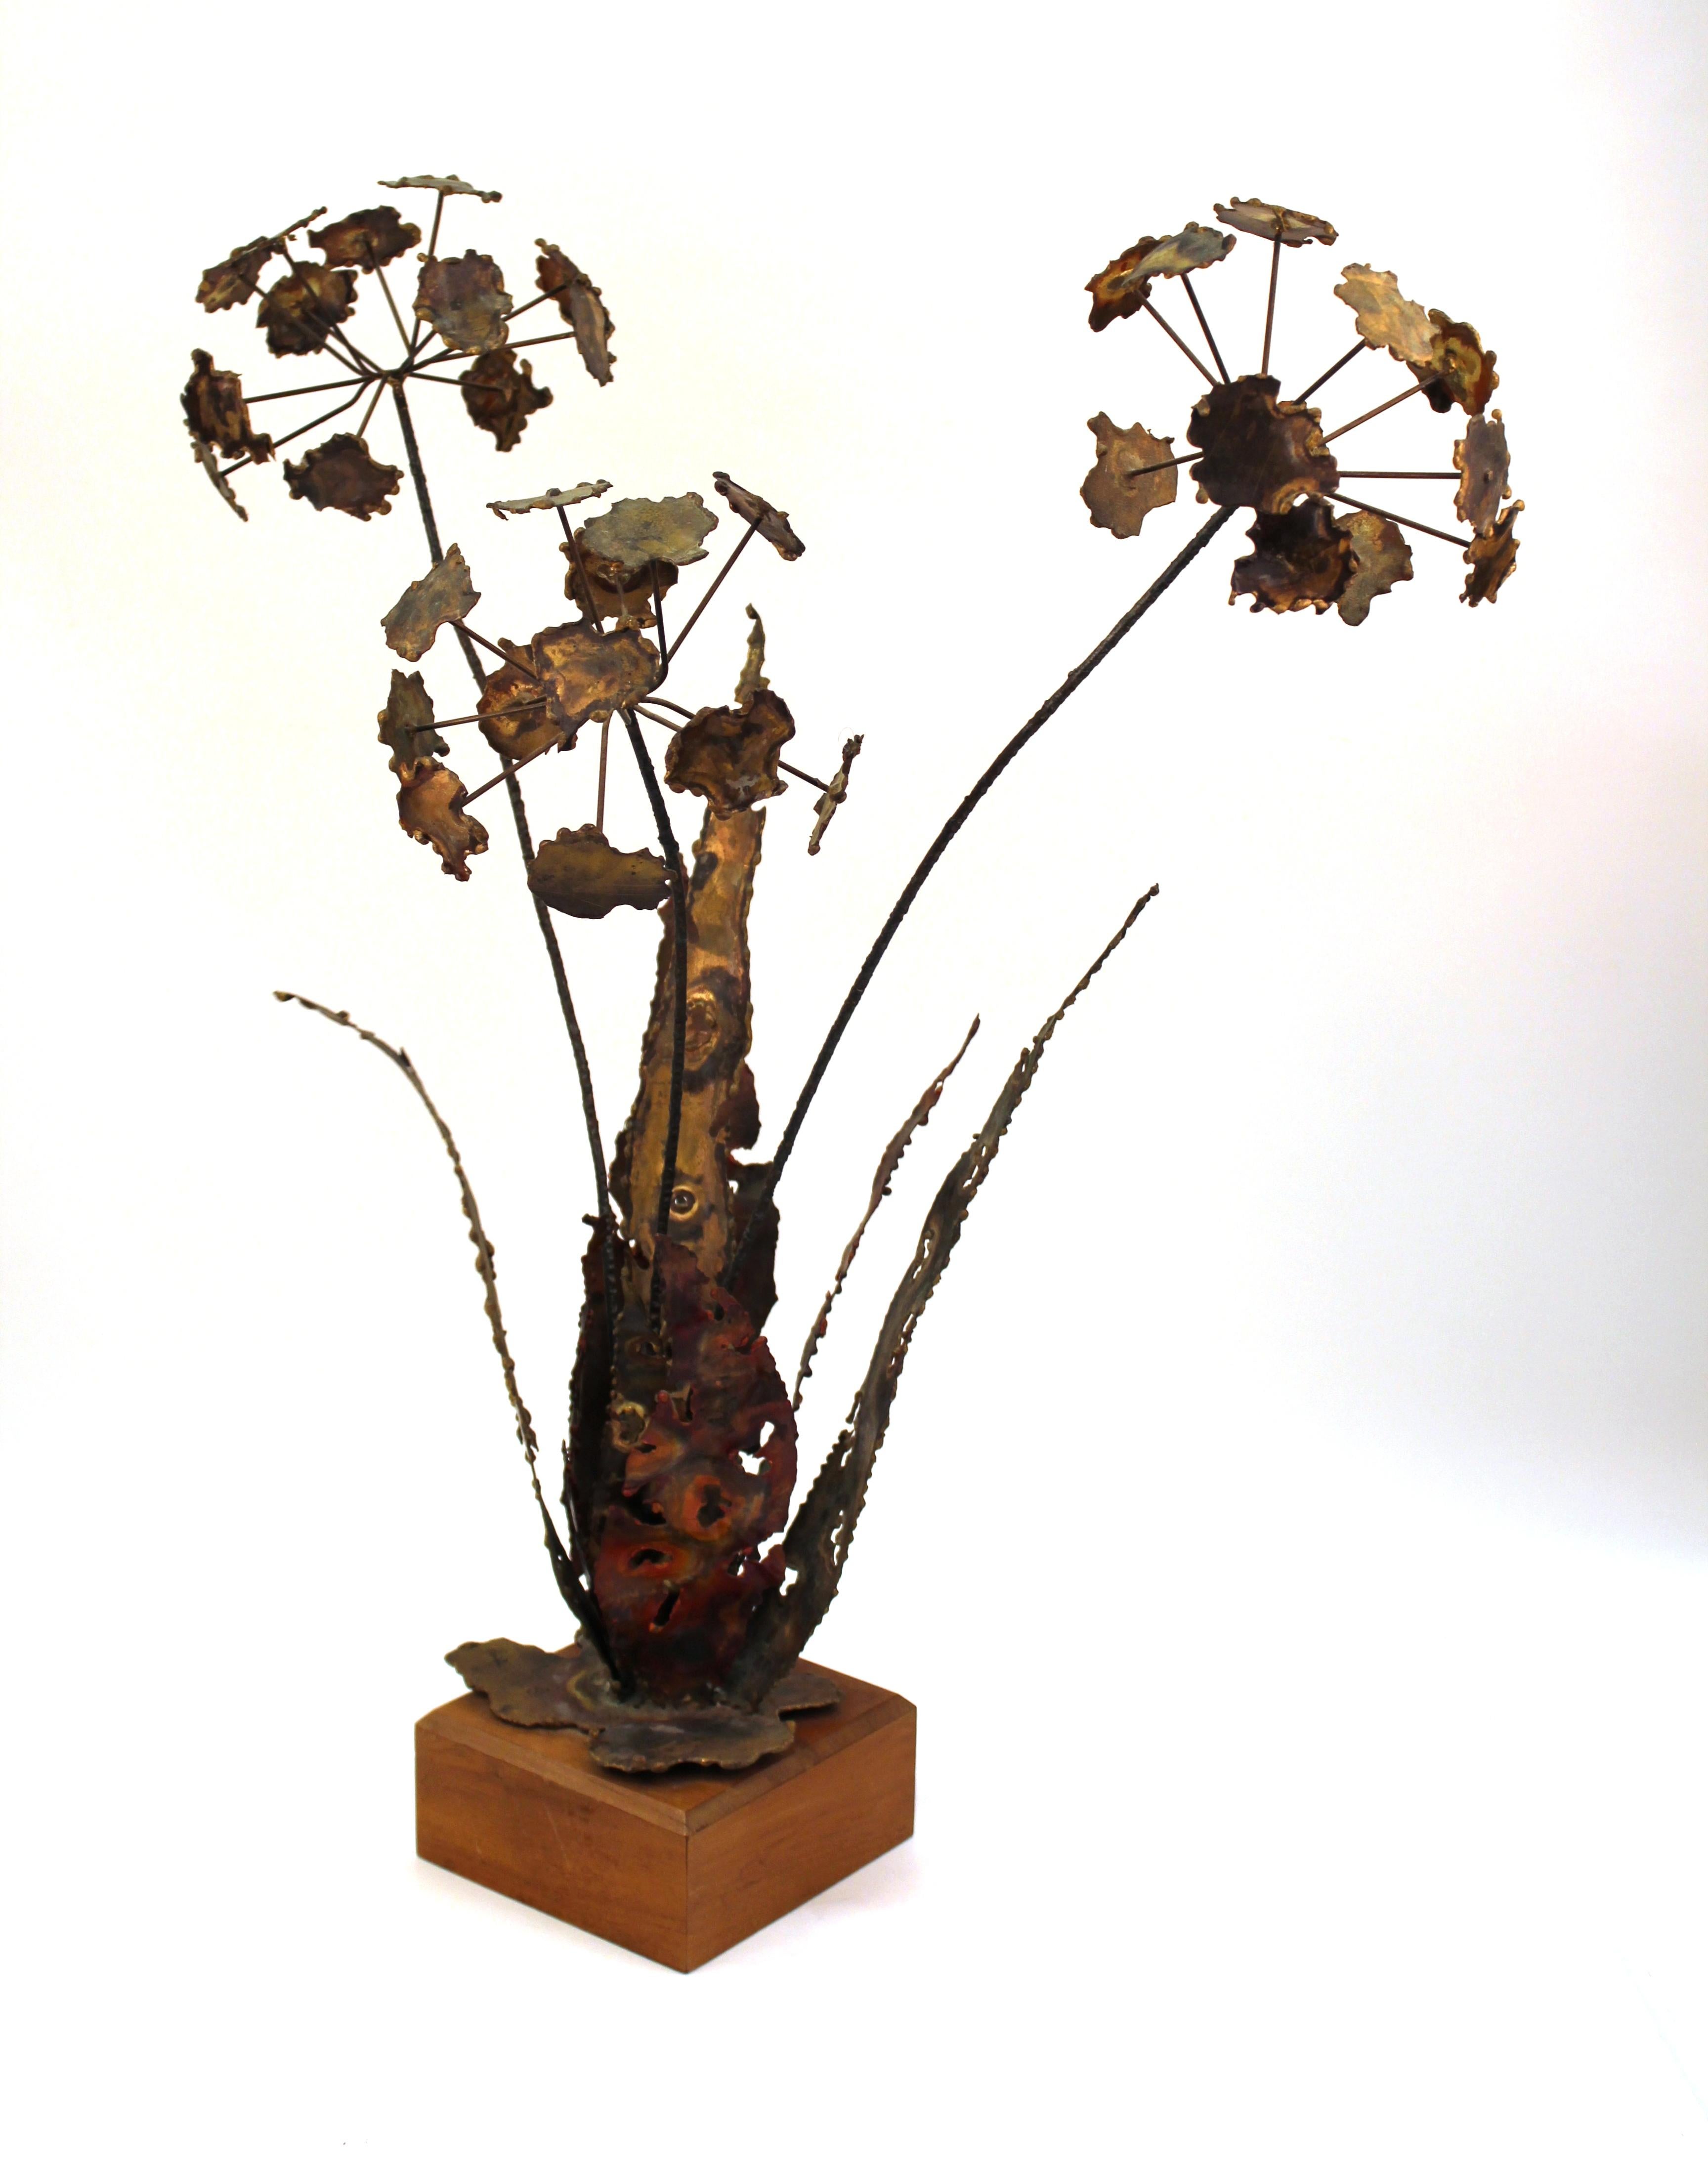 Silas Seandel Brutalist sculpture of a spray of flowers in distressed patinated metal. Features in include three long steams with a bushel of flowers at the top of each. The flowers are surrounded by several long pointed leaves and are supported by